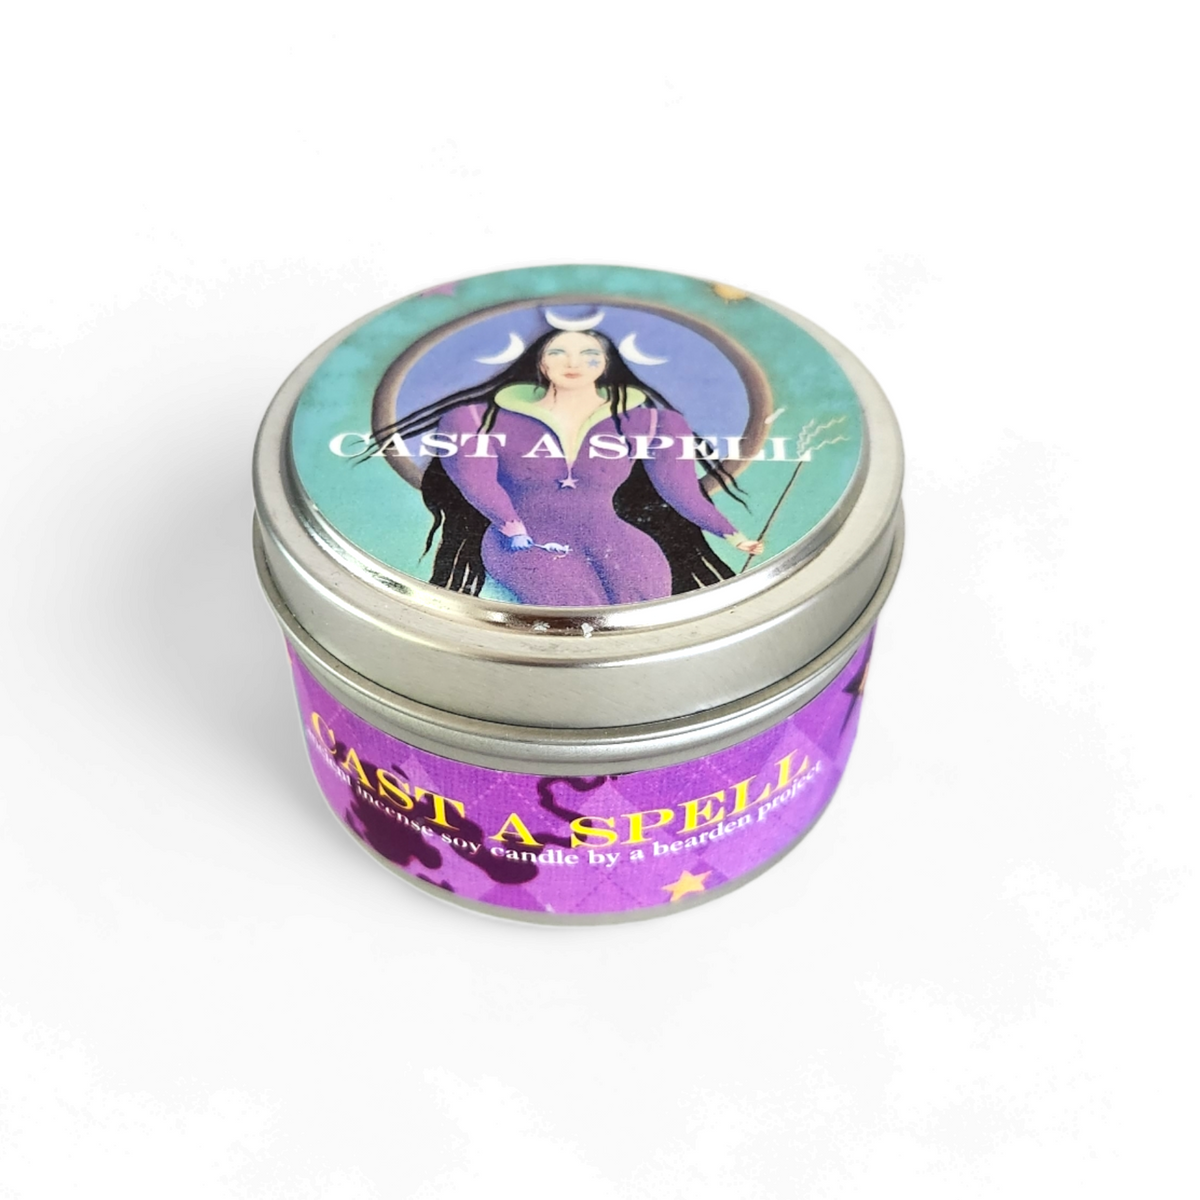 Cast a Spell Candle - 4oz